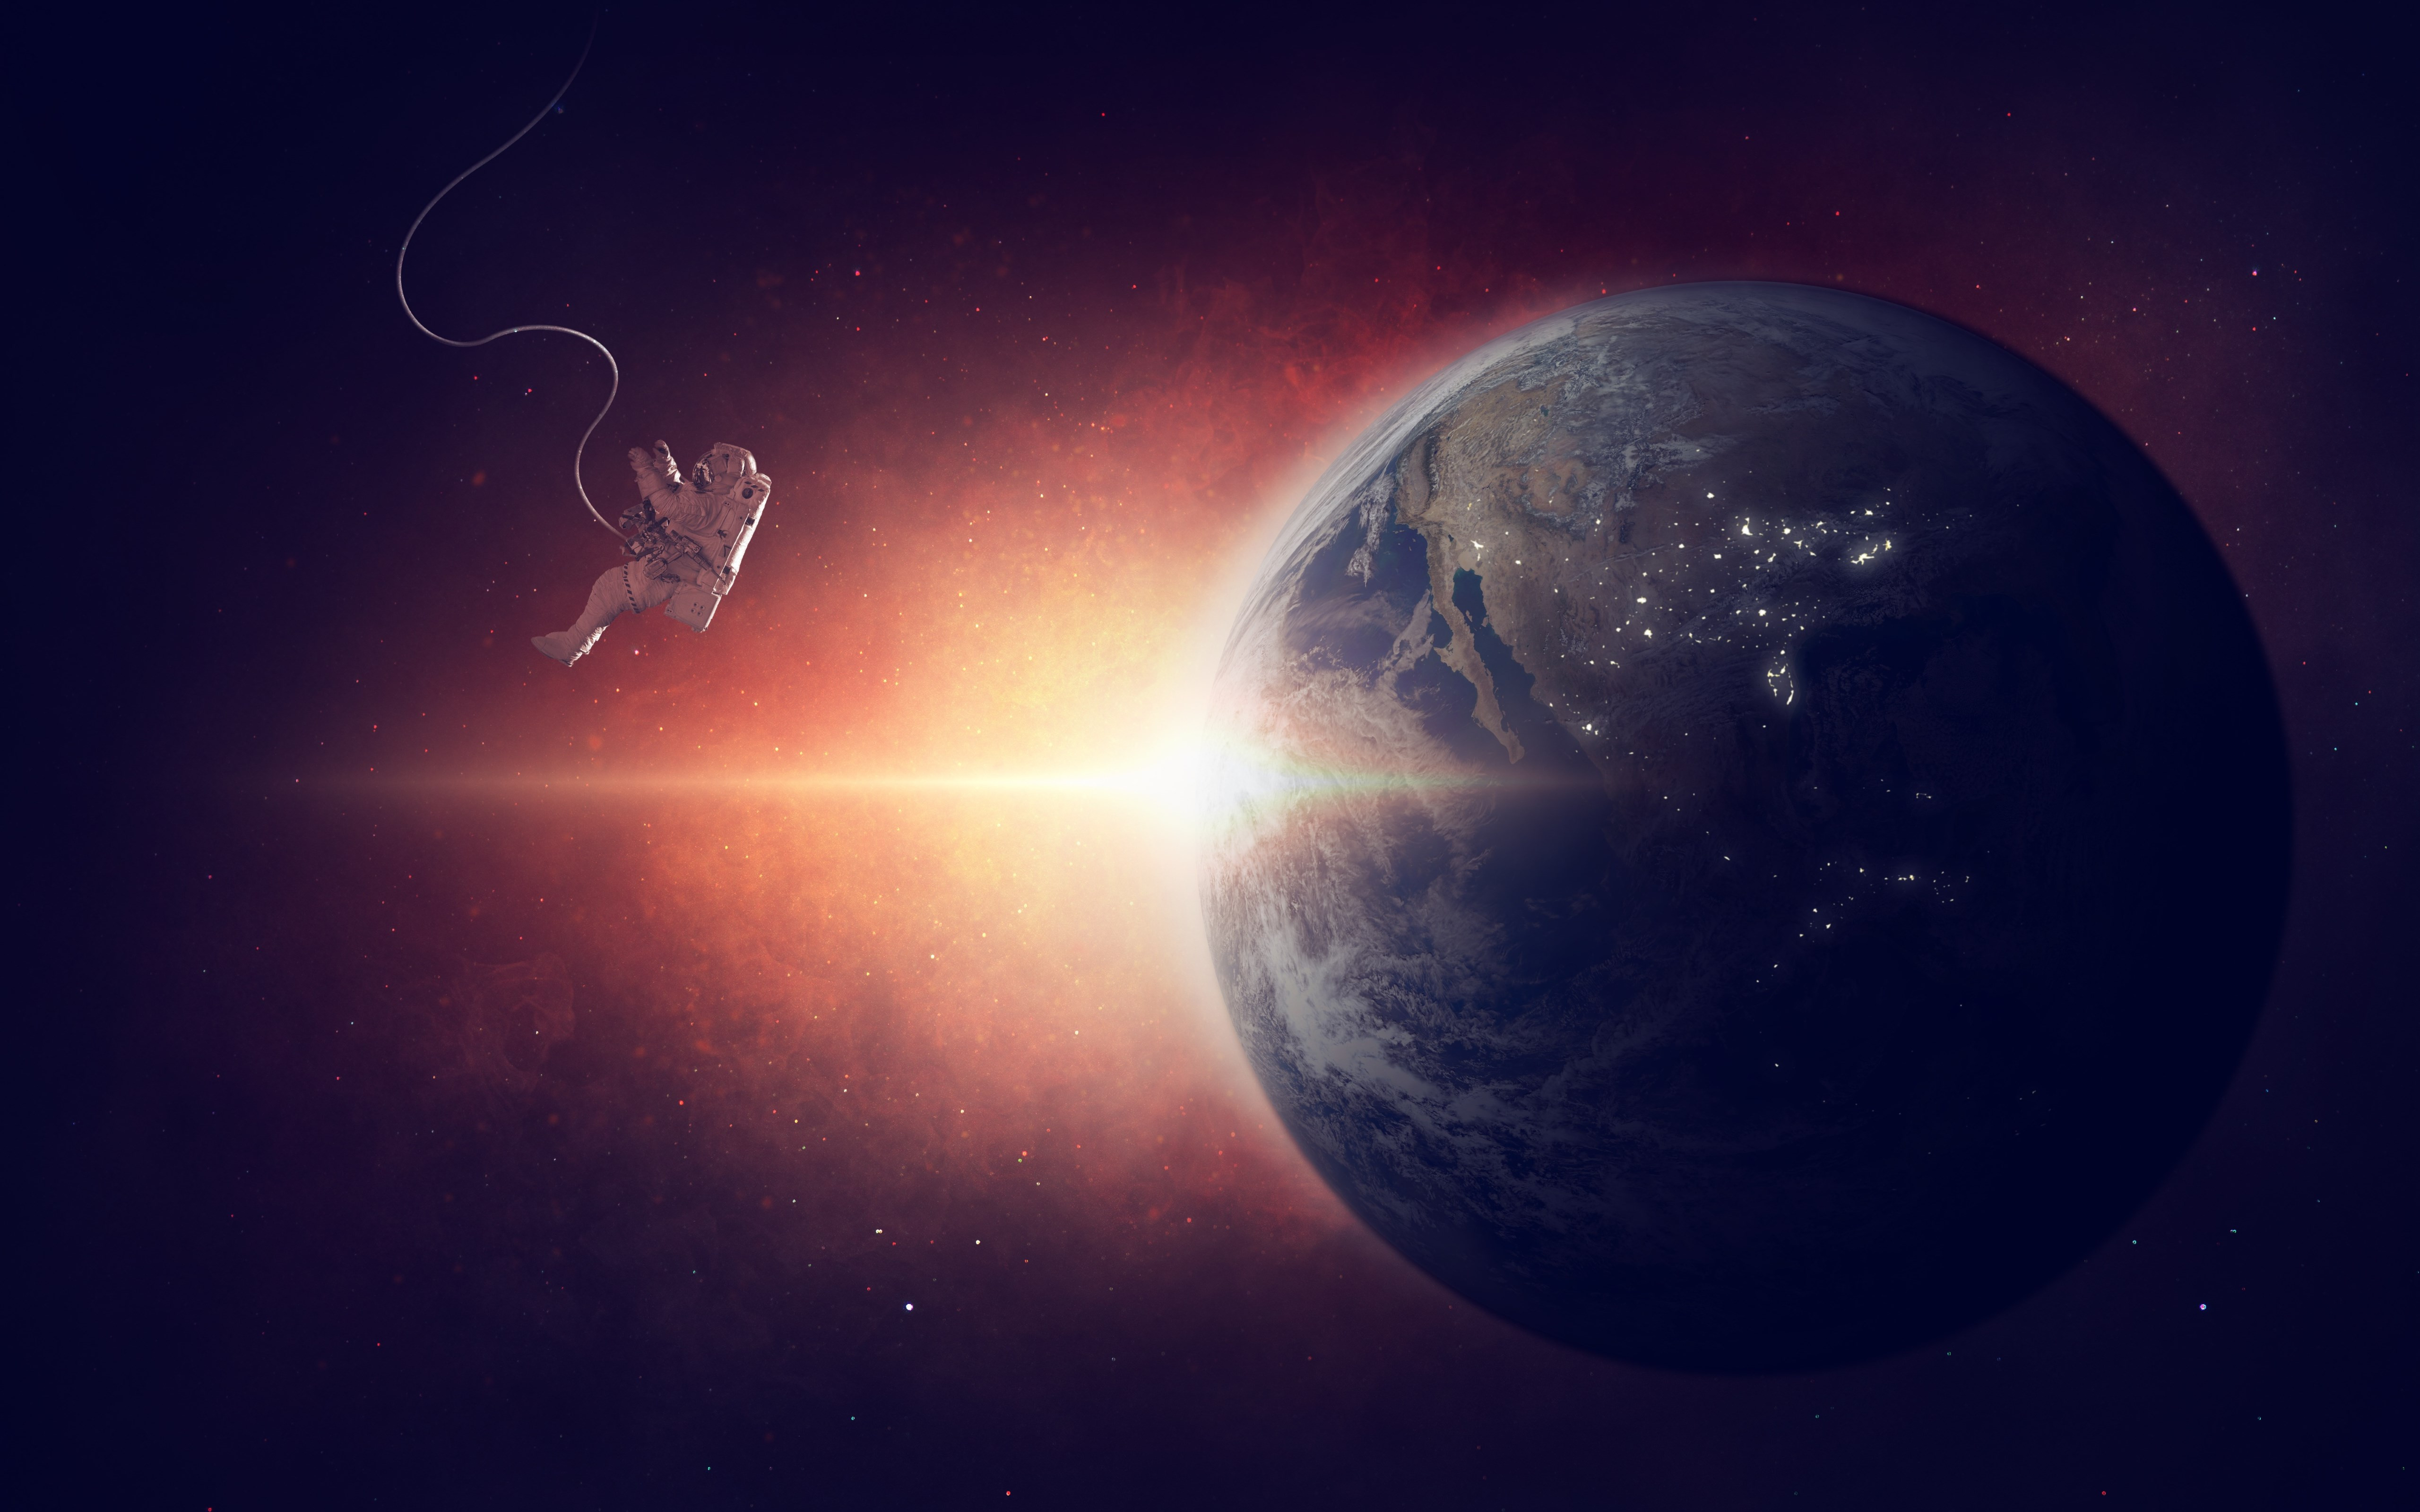 Download wallpaper: Lost in space 5120x3200